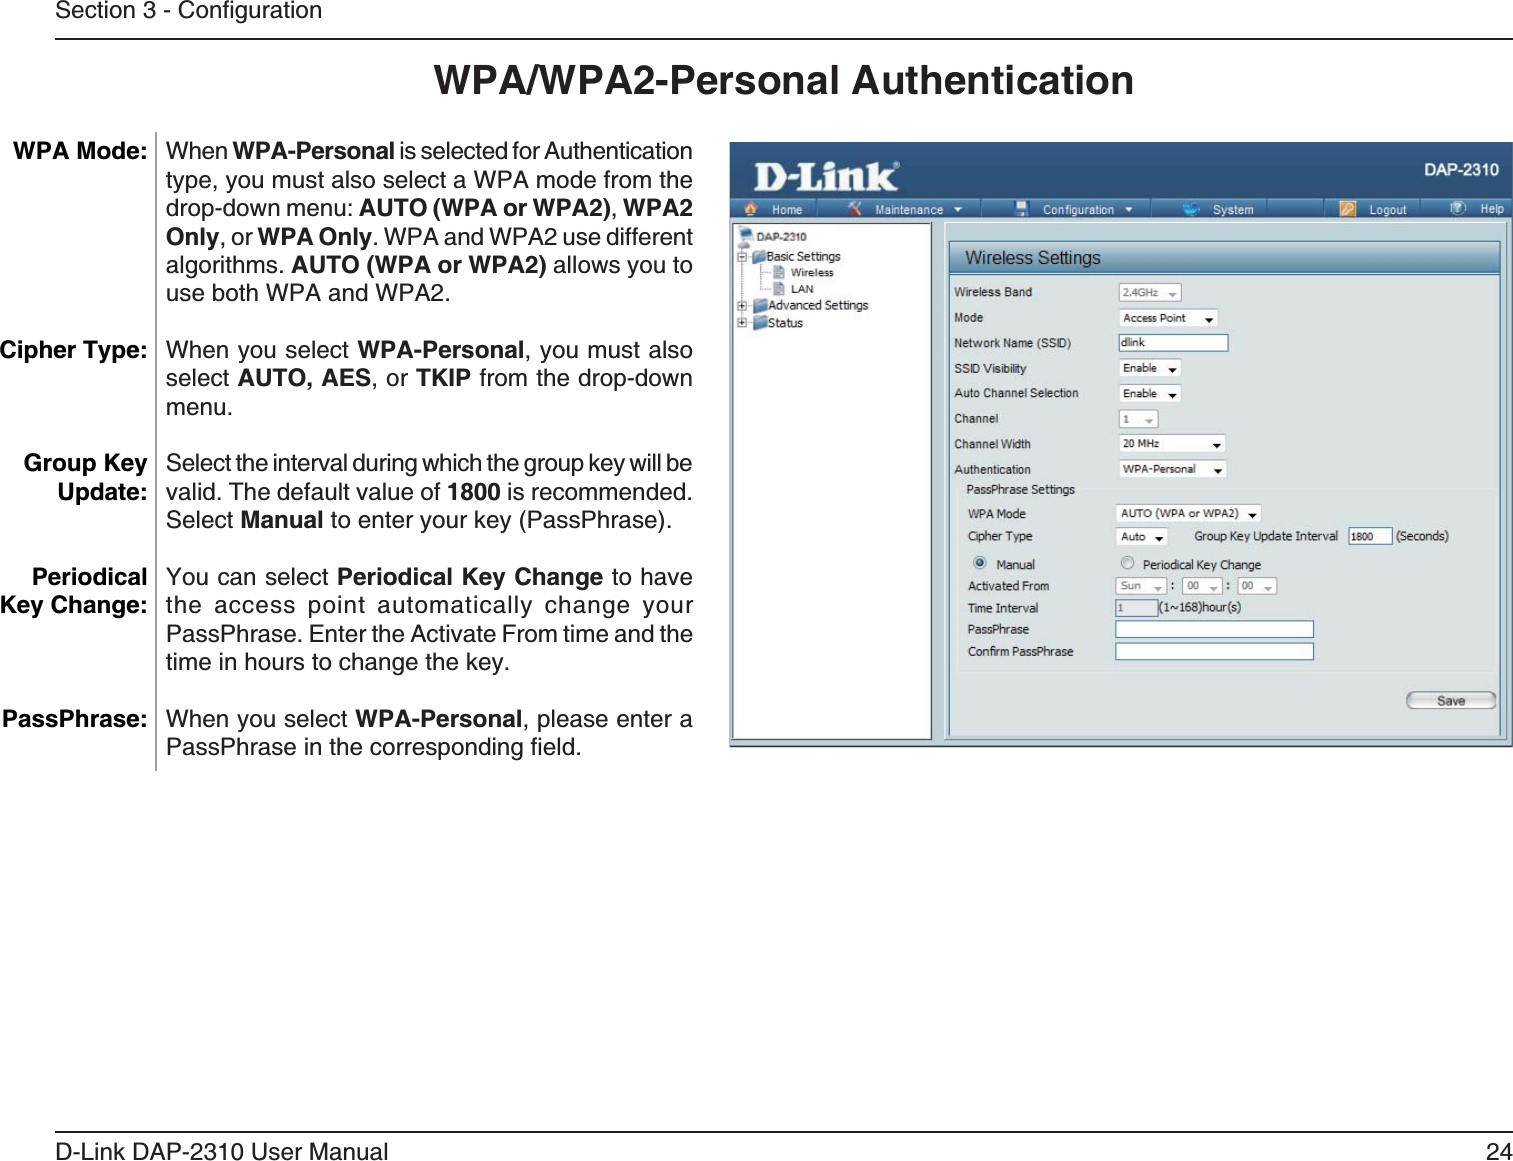 24D-Link DAP-2310 User ManualWPA/WPA2-Personal AuthenticationWhen WPA-Personal is selected for Authentication type, you must also select a WPA mode from the AUTO (WPA or WPA2), WPA2 Only, or WPA Only. WPA and WPA2 use different algorithms. AUTO (WPA or WPA2) allows you to use both WPA and WPA2.When you select WPA-Personal, you must also select AUTO, AES, or TKIP from the drop-down menu.Select the interval during which the group key will be valid. The default value of 1800 is recommended.Select ManualPeriodical Key Change to have the access point automatically change your PassPhrase. Enter the Activate From time and the time in hours to change the key.When you select WPA-Personal, please enter a PassPhrase WPA Mode: Cipher Type:Group Key Update:Periodical Key Change:PassPhrase: